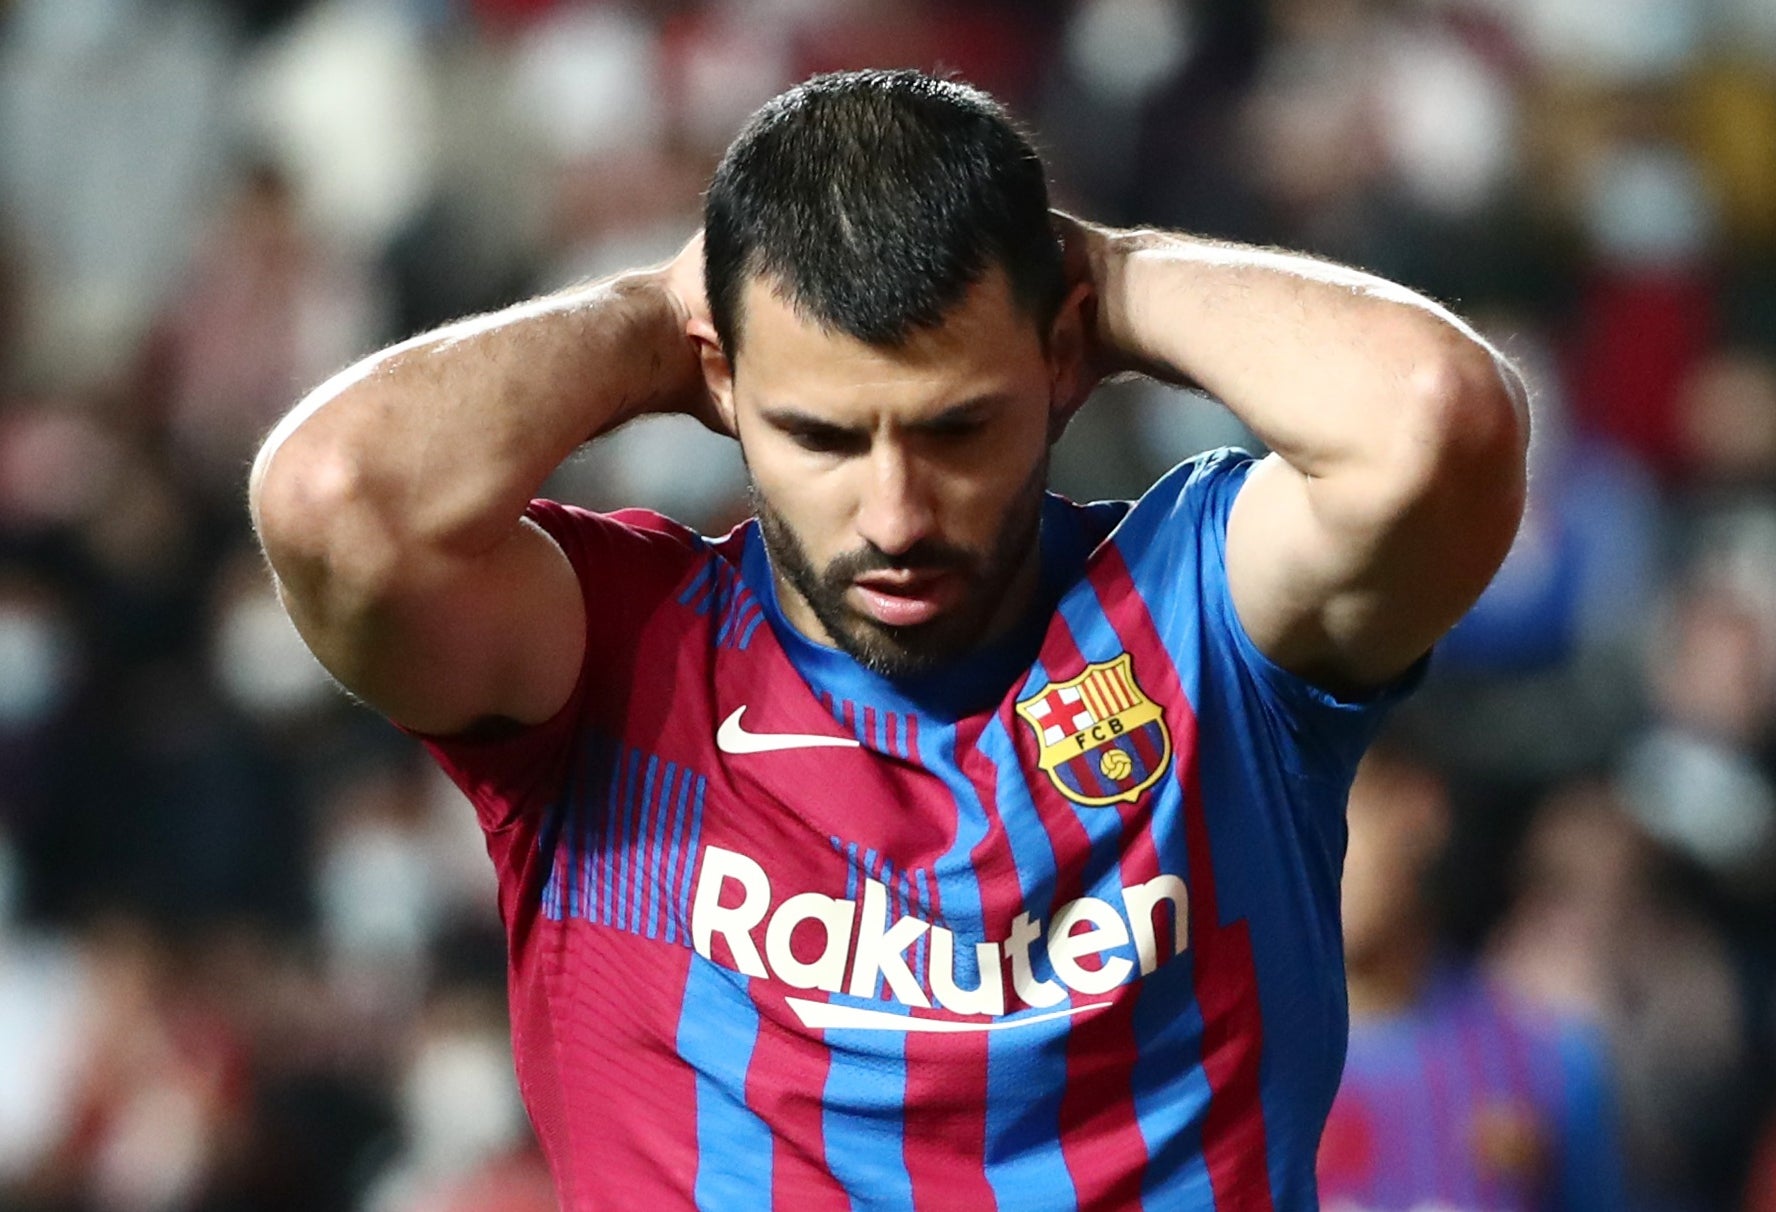 The Barcelona striker has been told by doctors to rest for three months